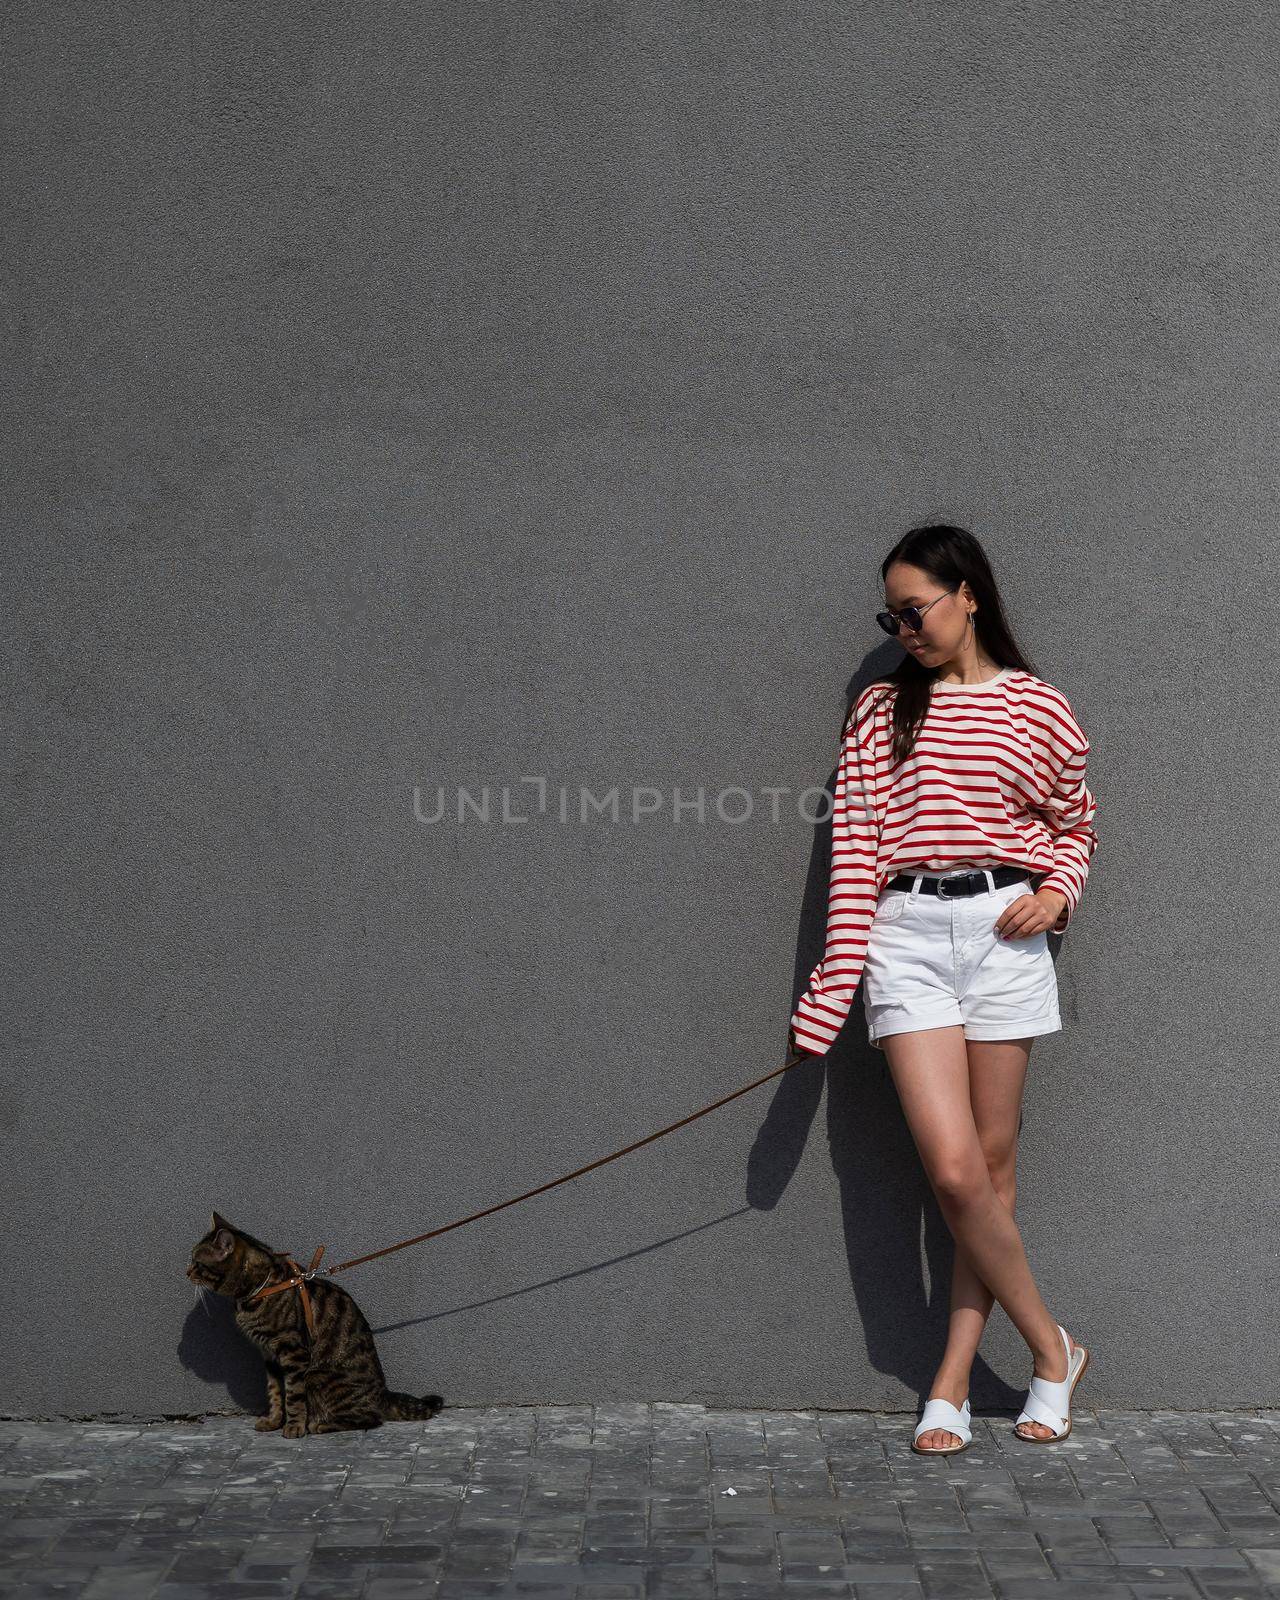 A young woman walks with a gray tabby cat on a leash against a gray wall. by mrwed54